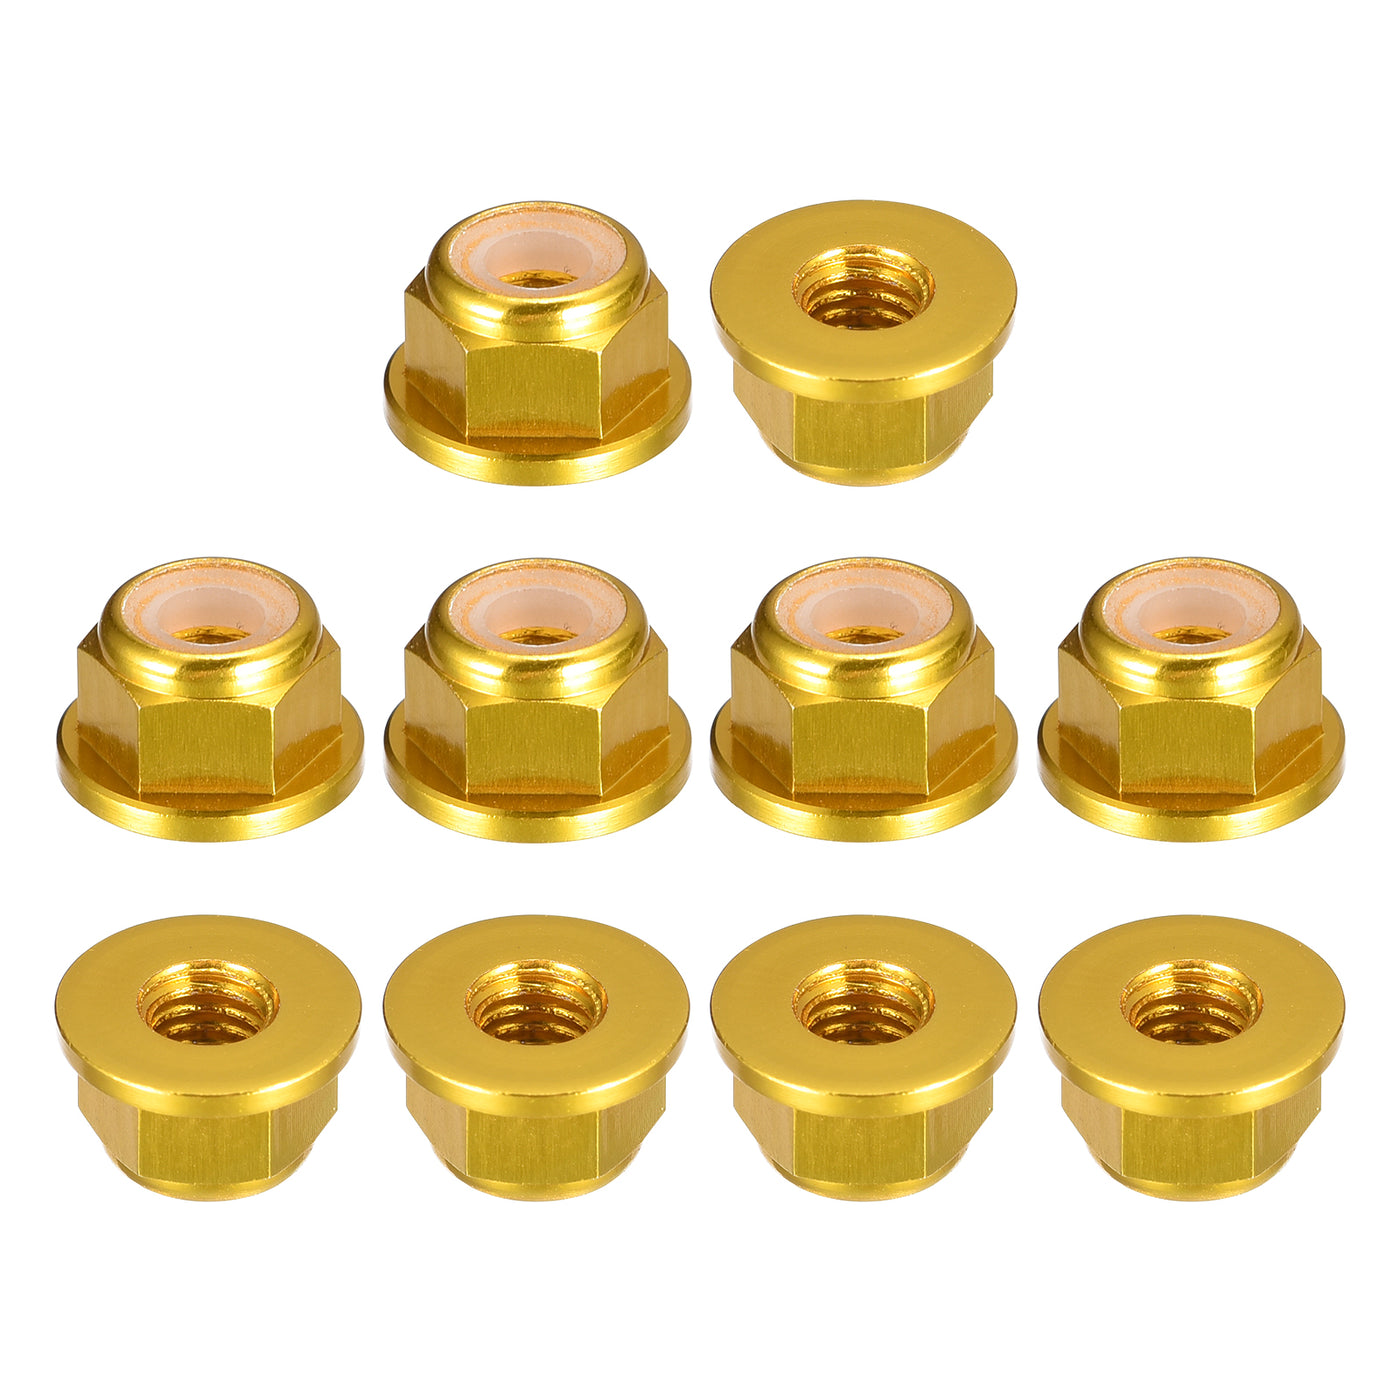 uxcell Uxcell Nylon Insert Hex Lock Nuts, 10pcs - M5 x 0.8mm Aluminum Alloy Self-Locking Nut, Anodizing Flange Lock Nut for Fasteners (Gold)